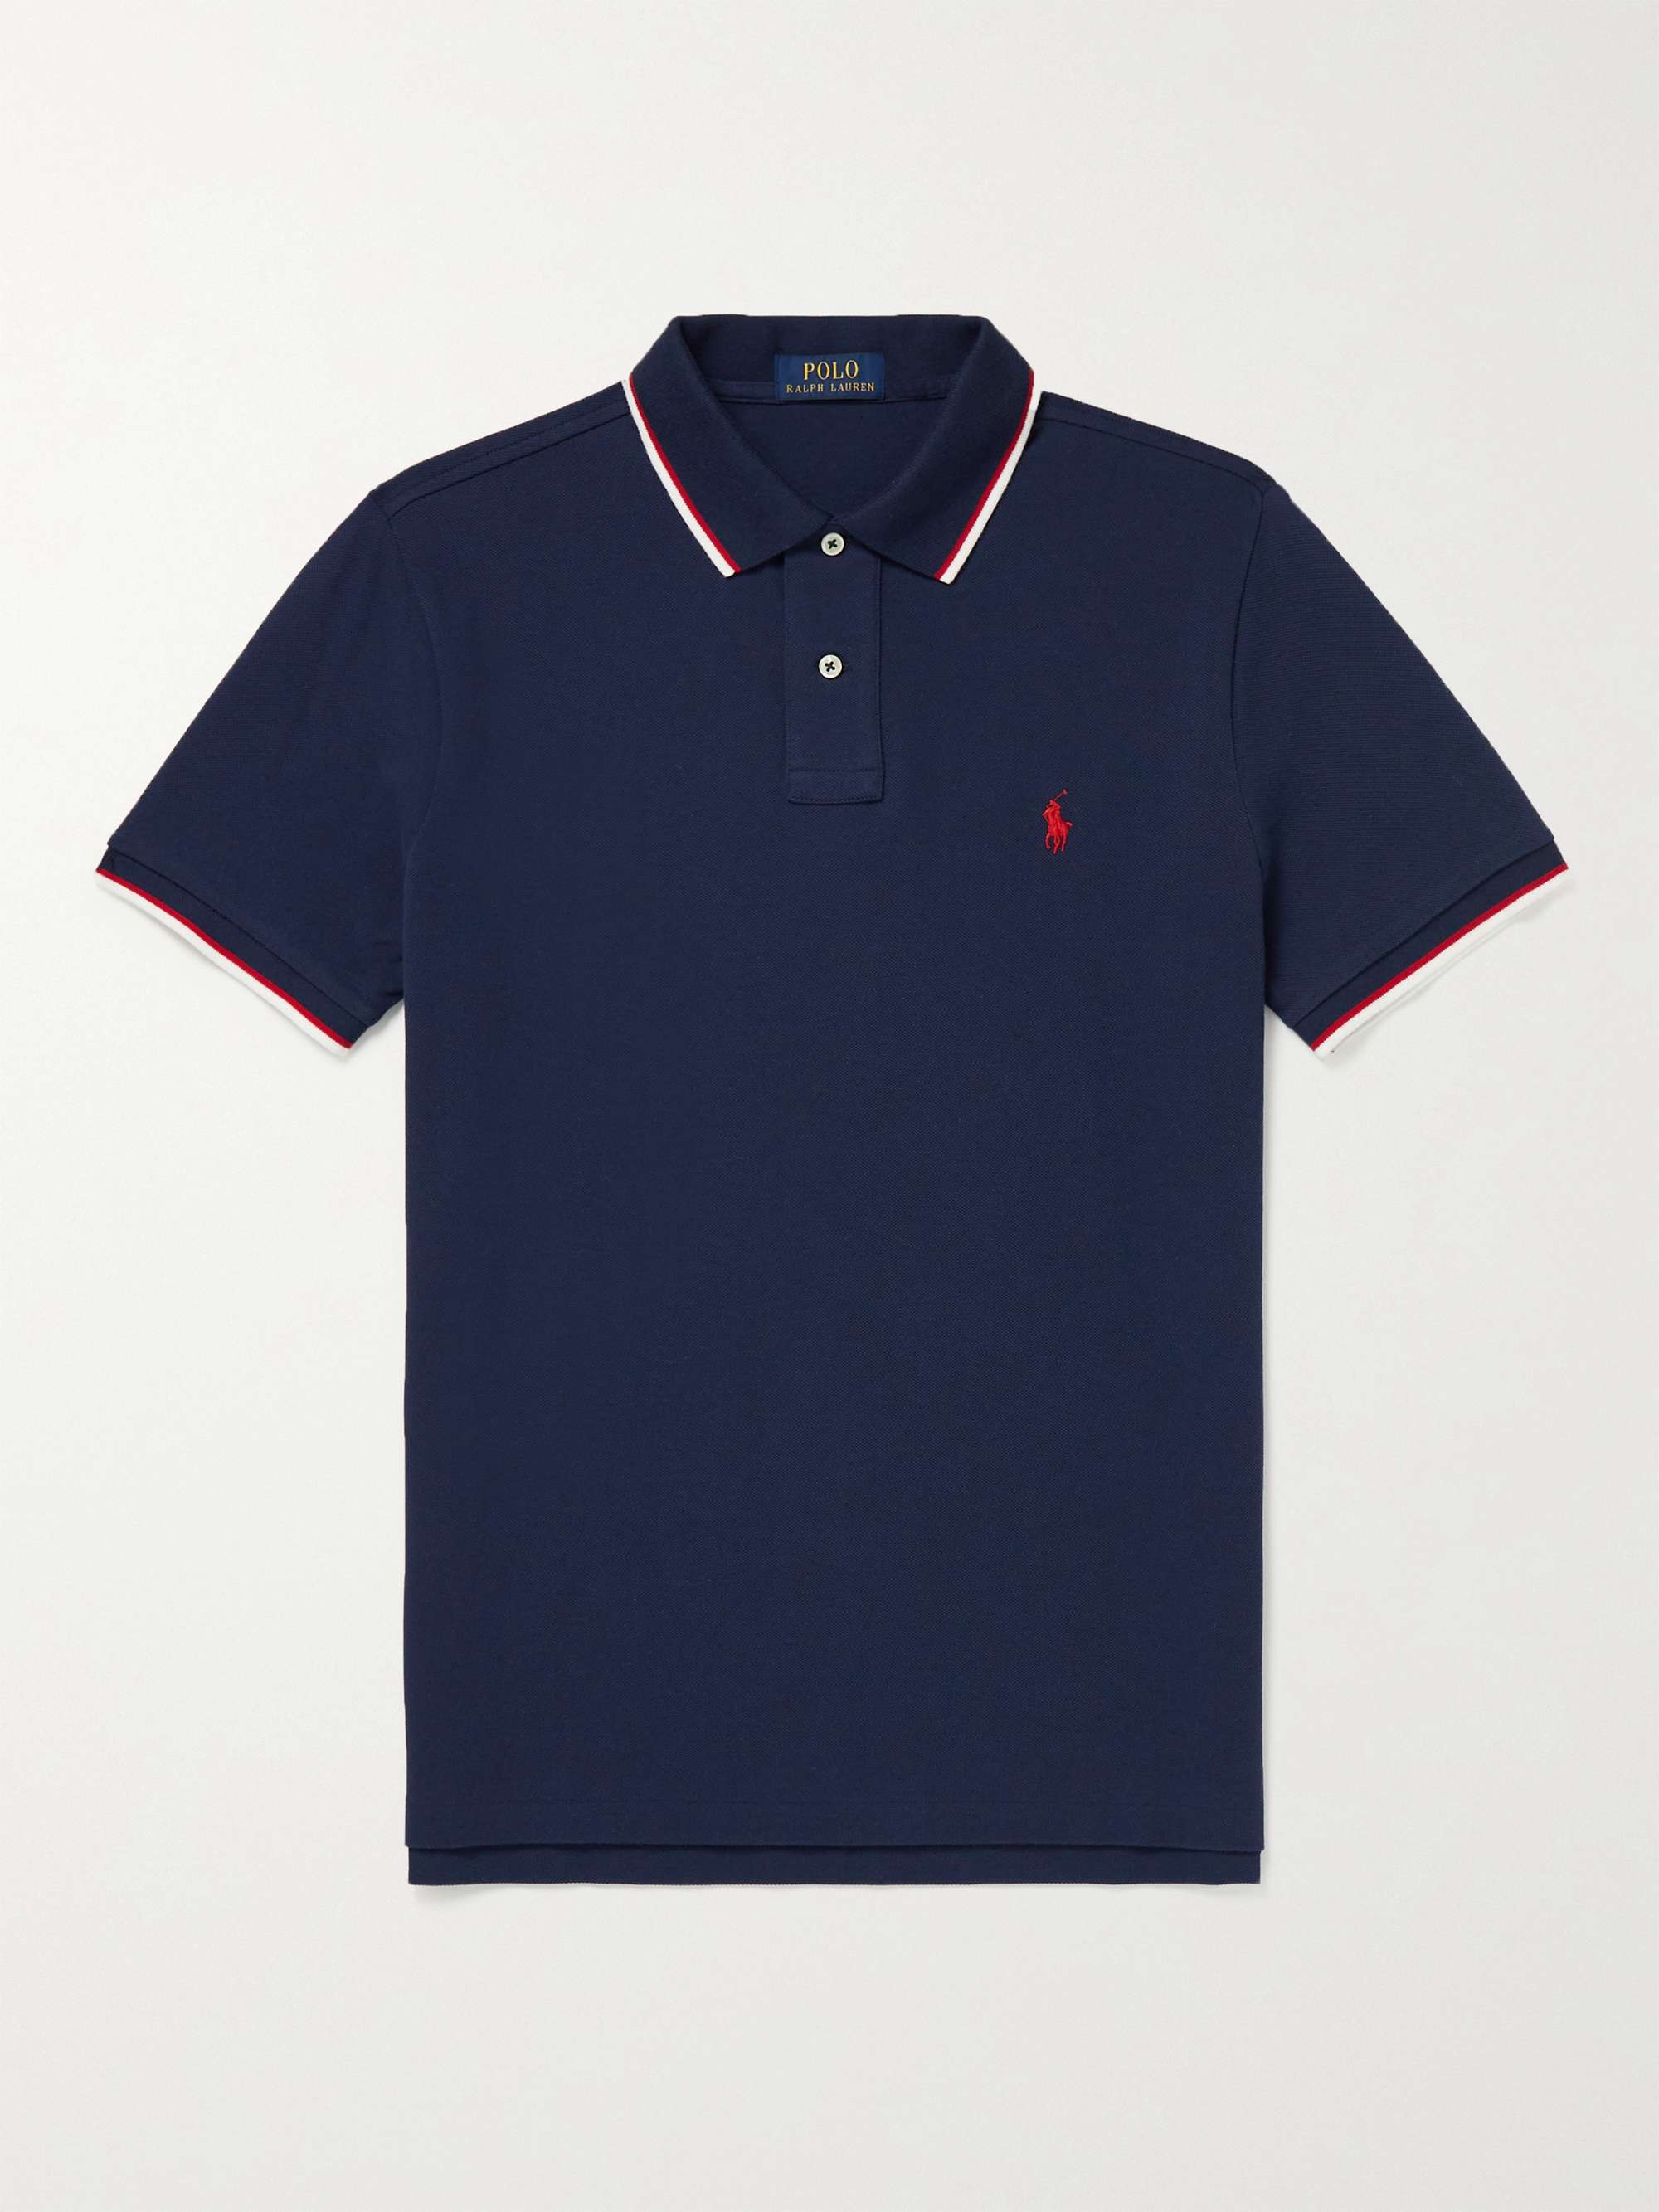 POLO RALPH LAUREN Slim-Fit Logo-Embroidered Contrast-Tipped Cotton-Piqué Polo Shirt